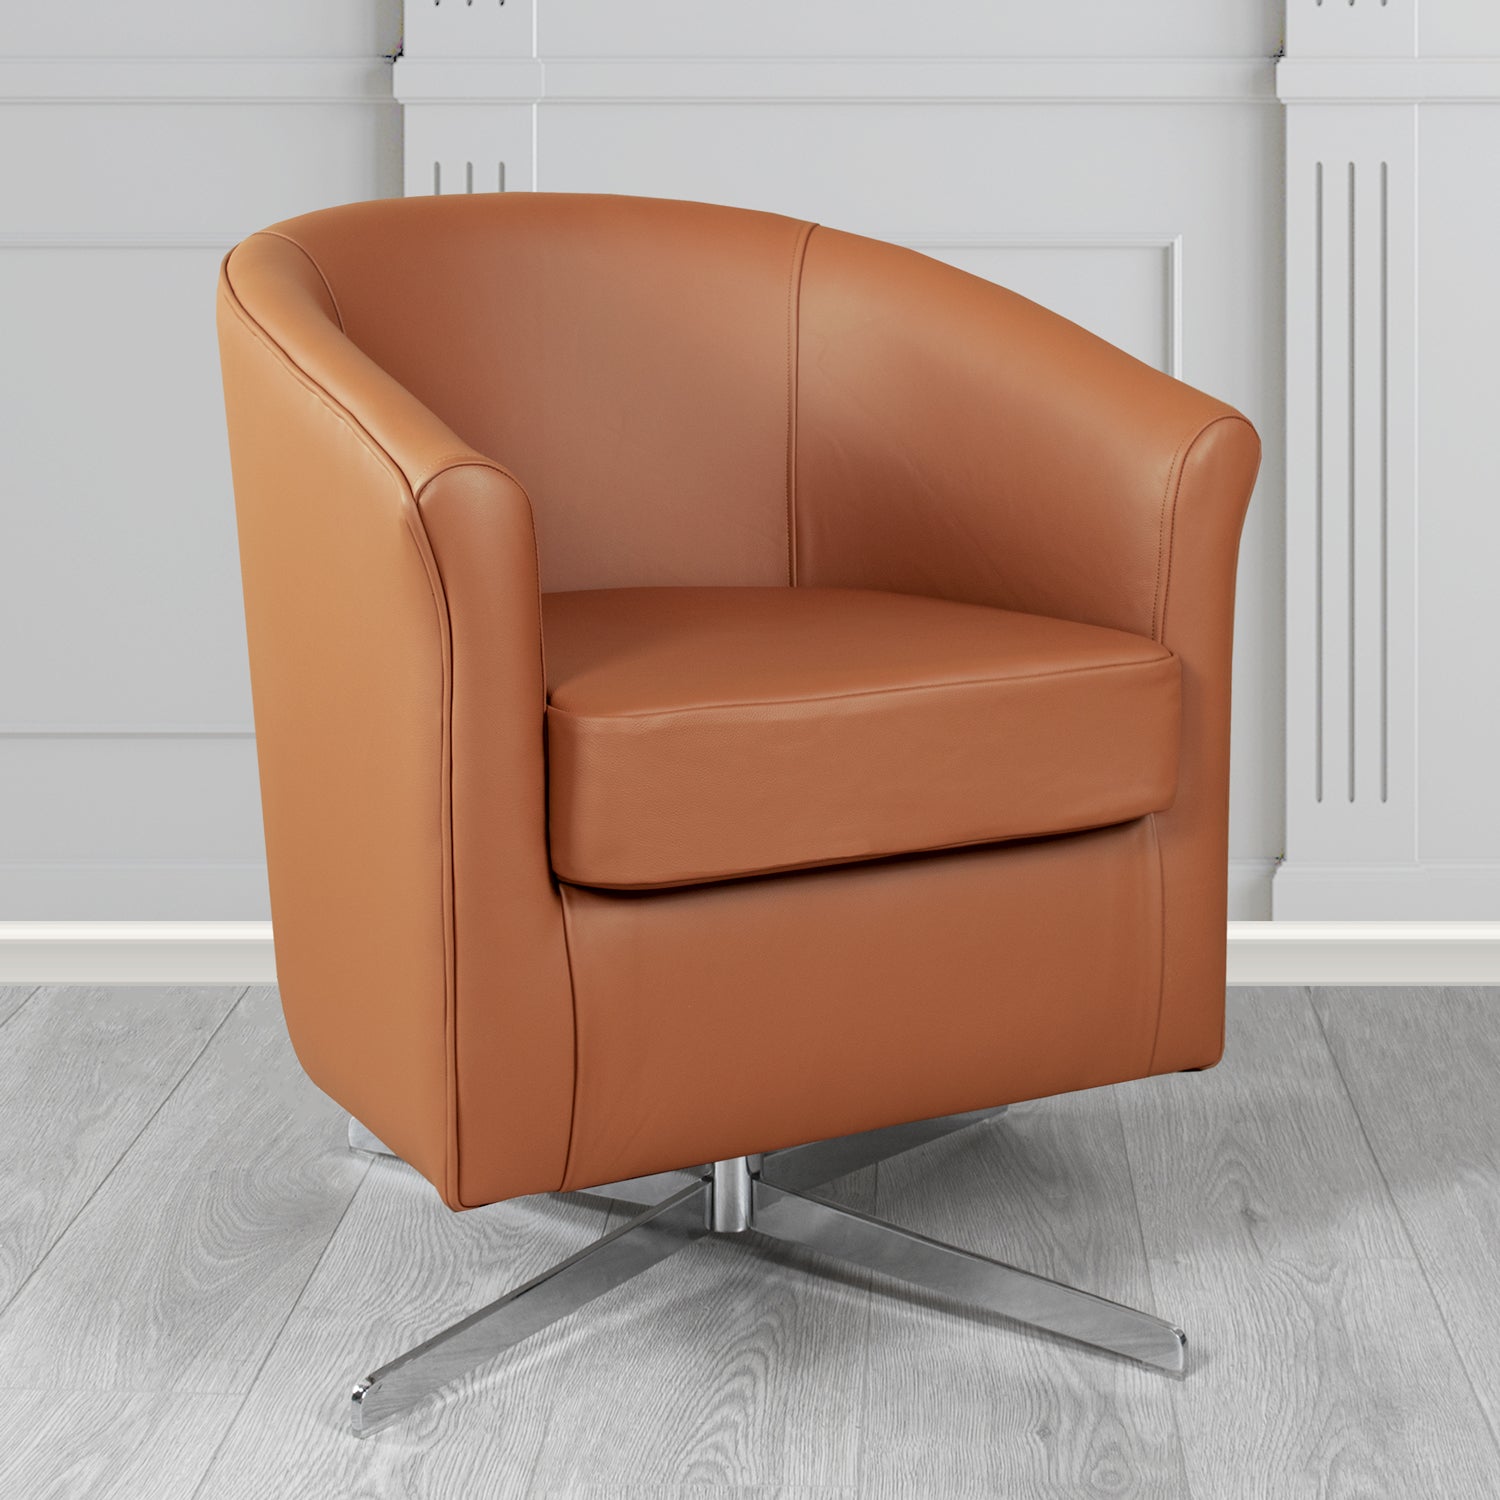 Cannes Swivel Tub Chair in Shelly Spice Crib 5 Genuine Leather - The Tub Chair Shop